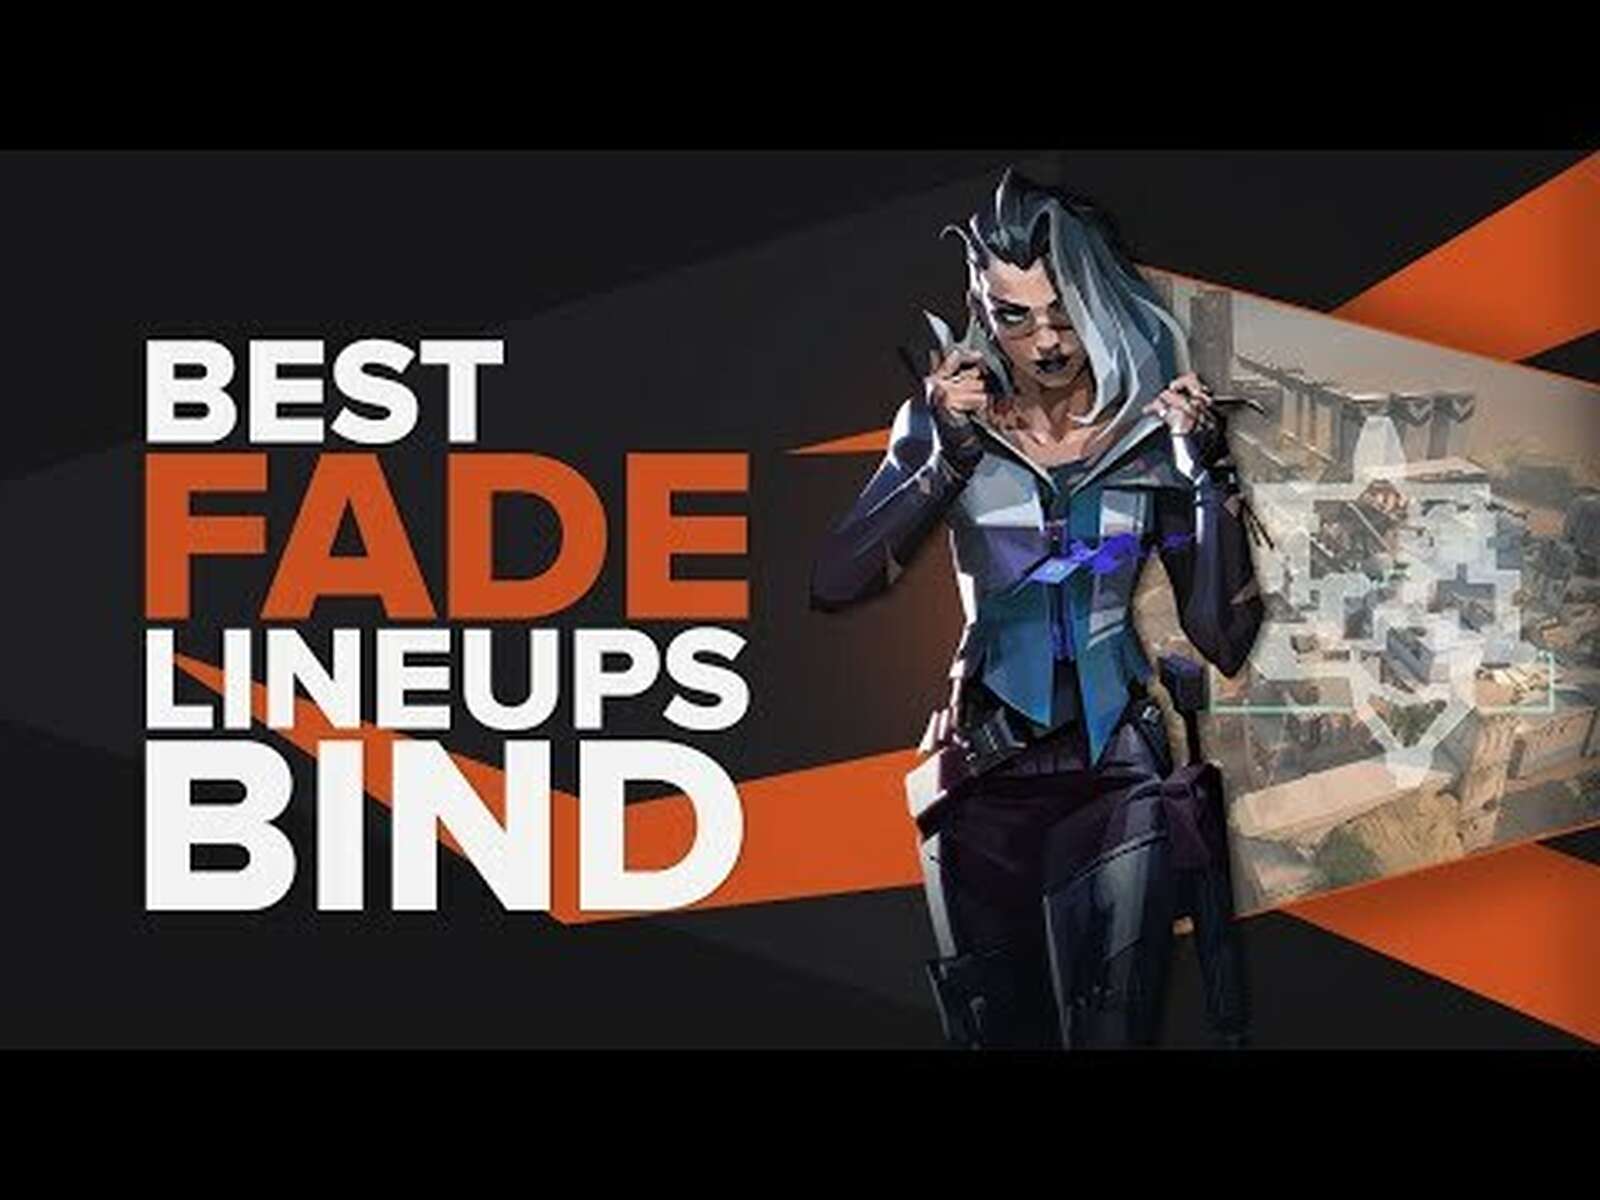 The Best Fade Lineups on Bind